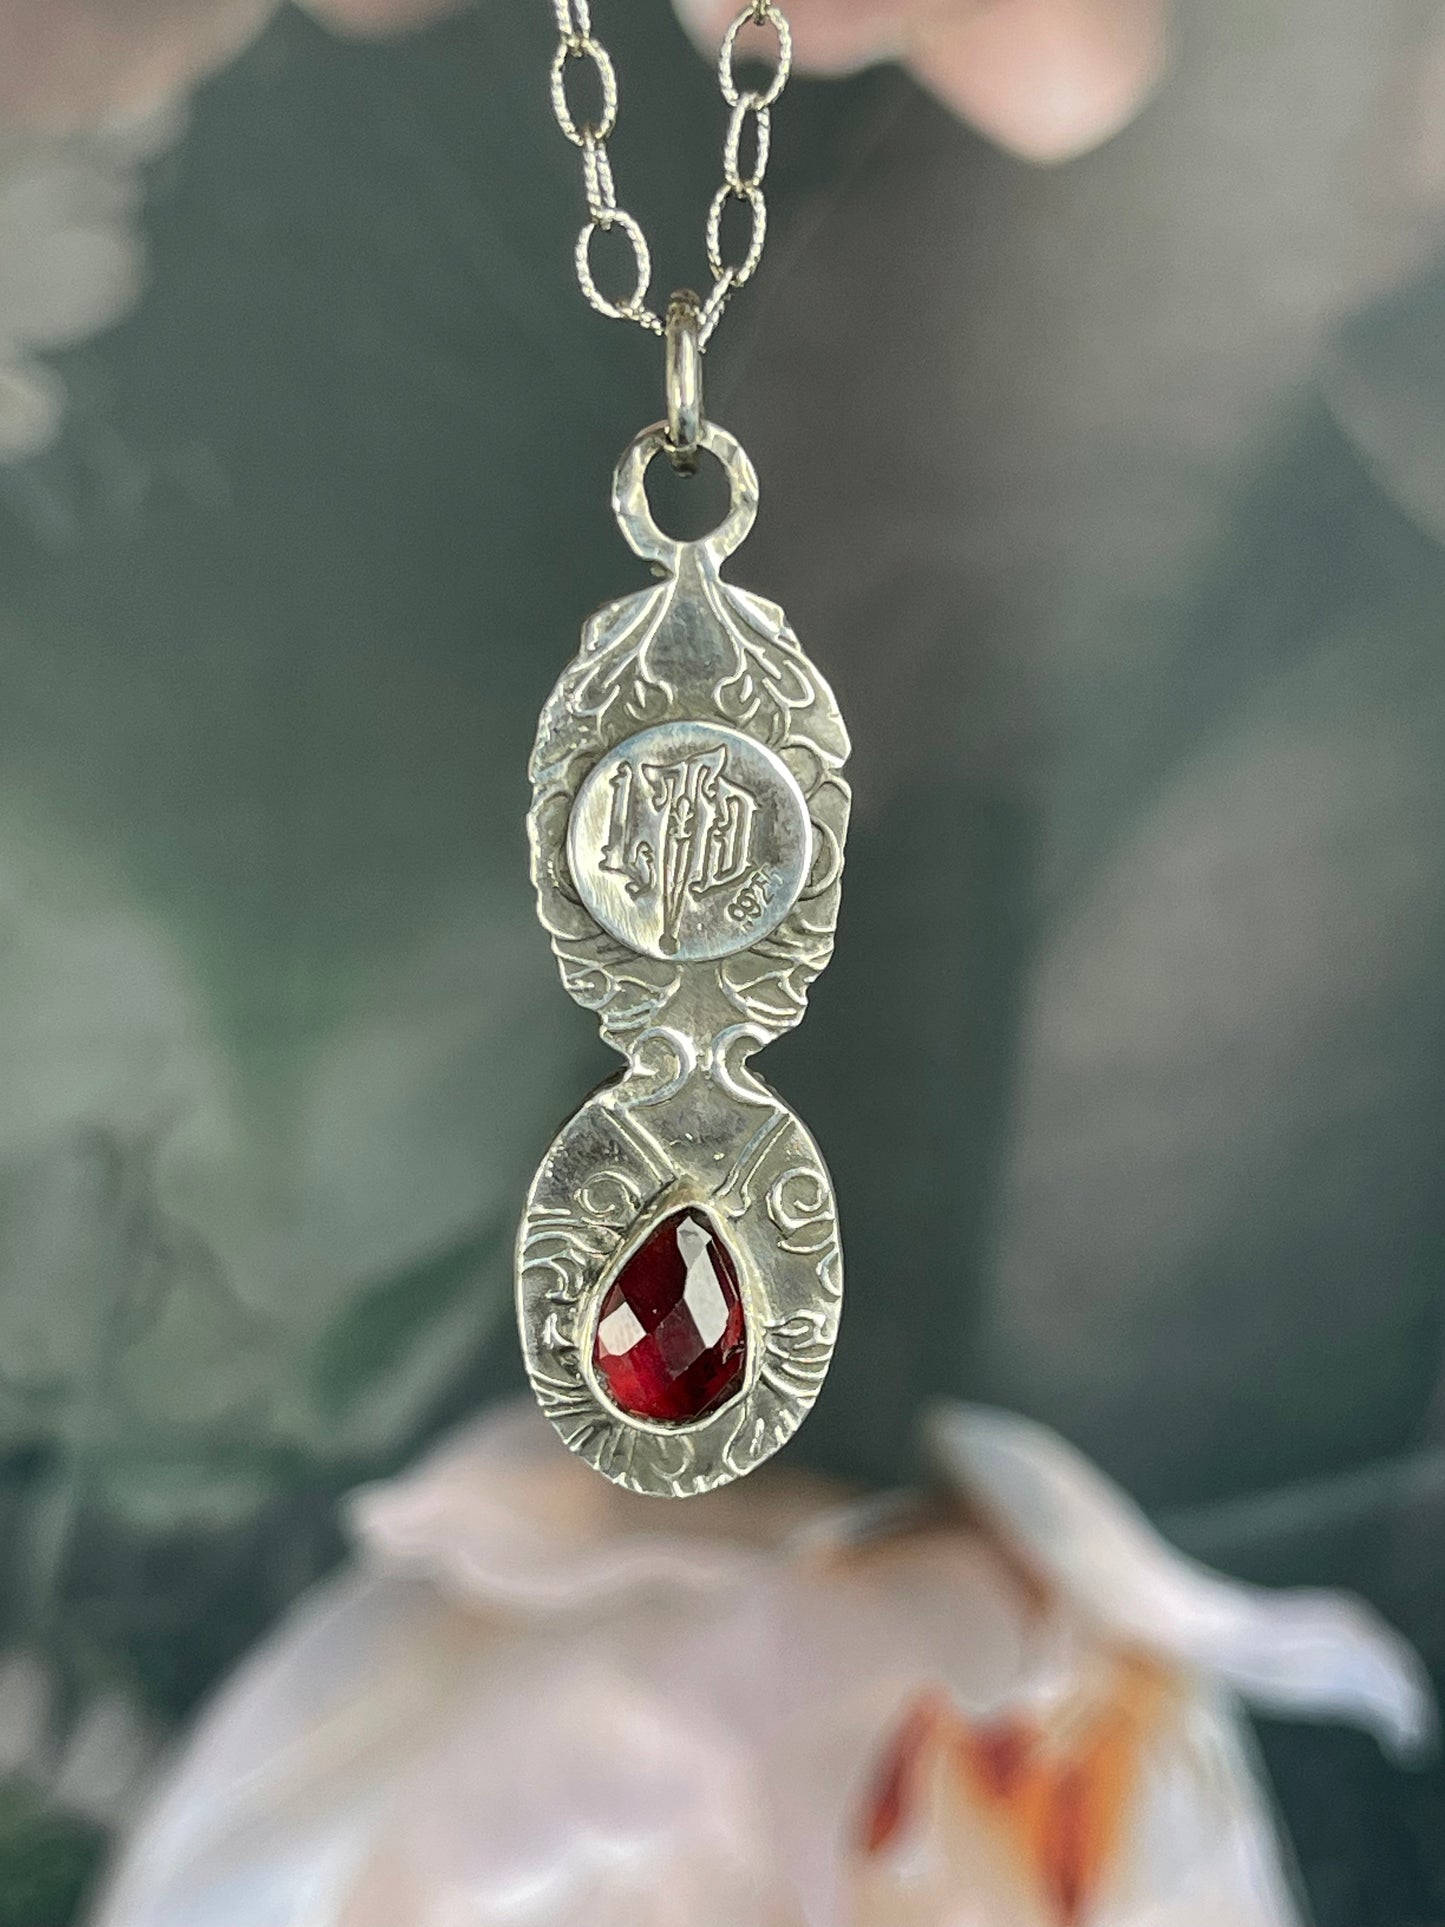 The Mini Medusa Gothic Victorian Sterling Necklace Moonstone